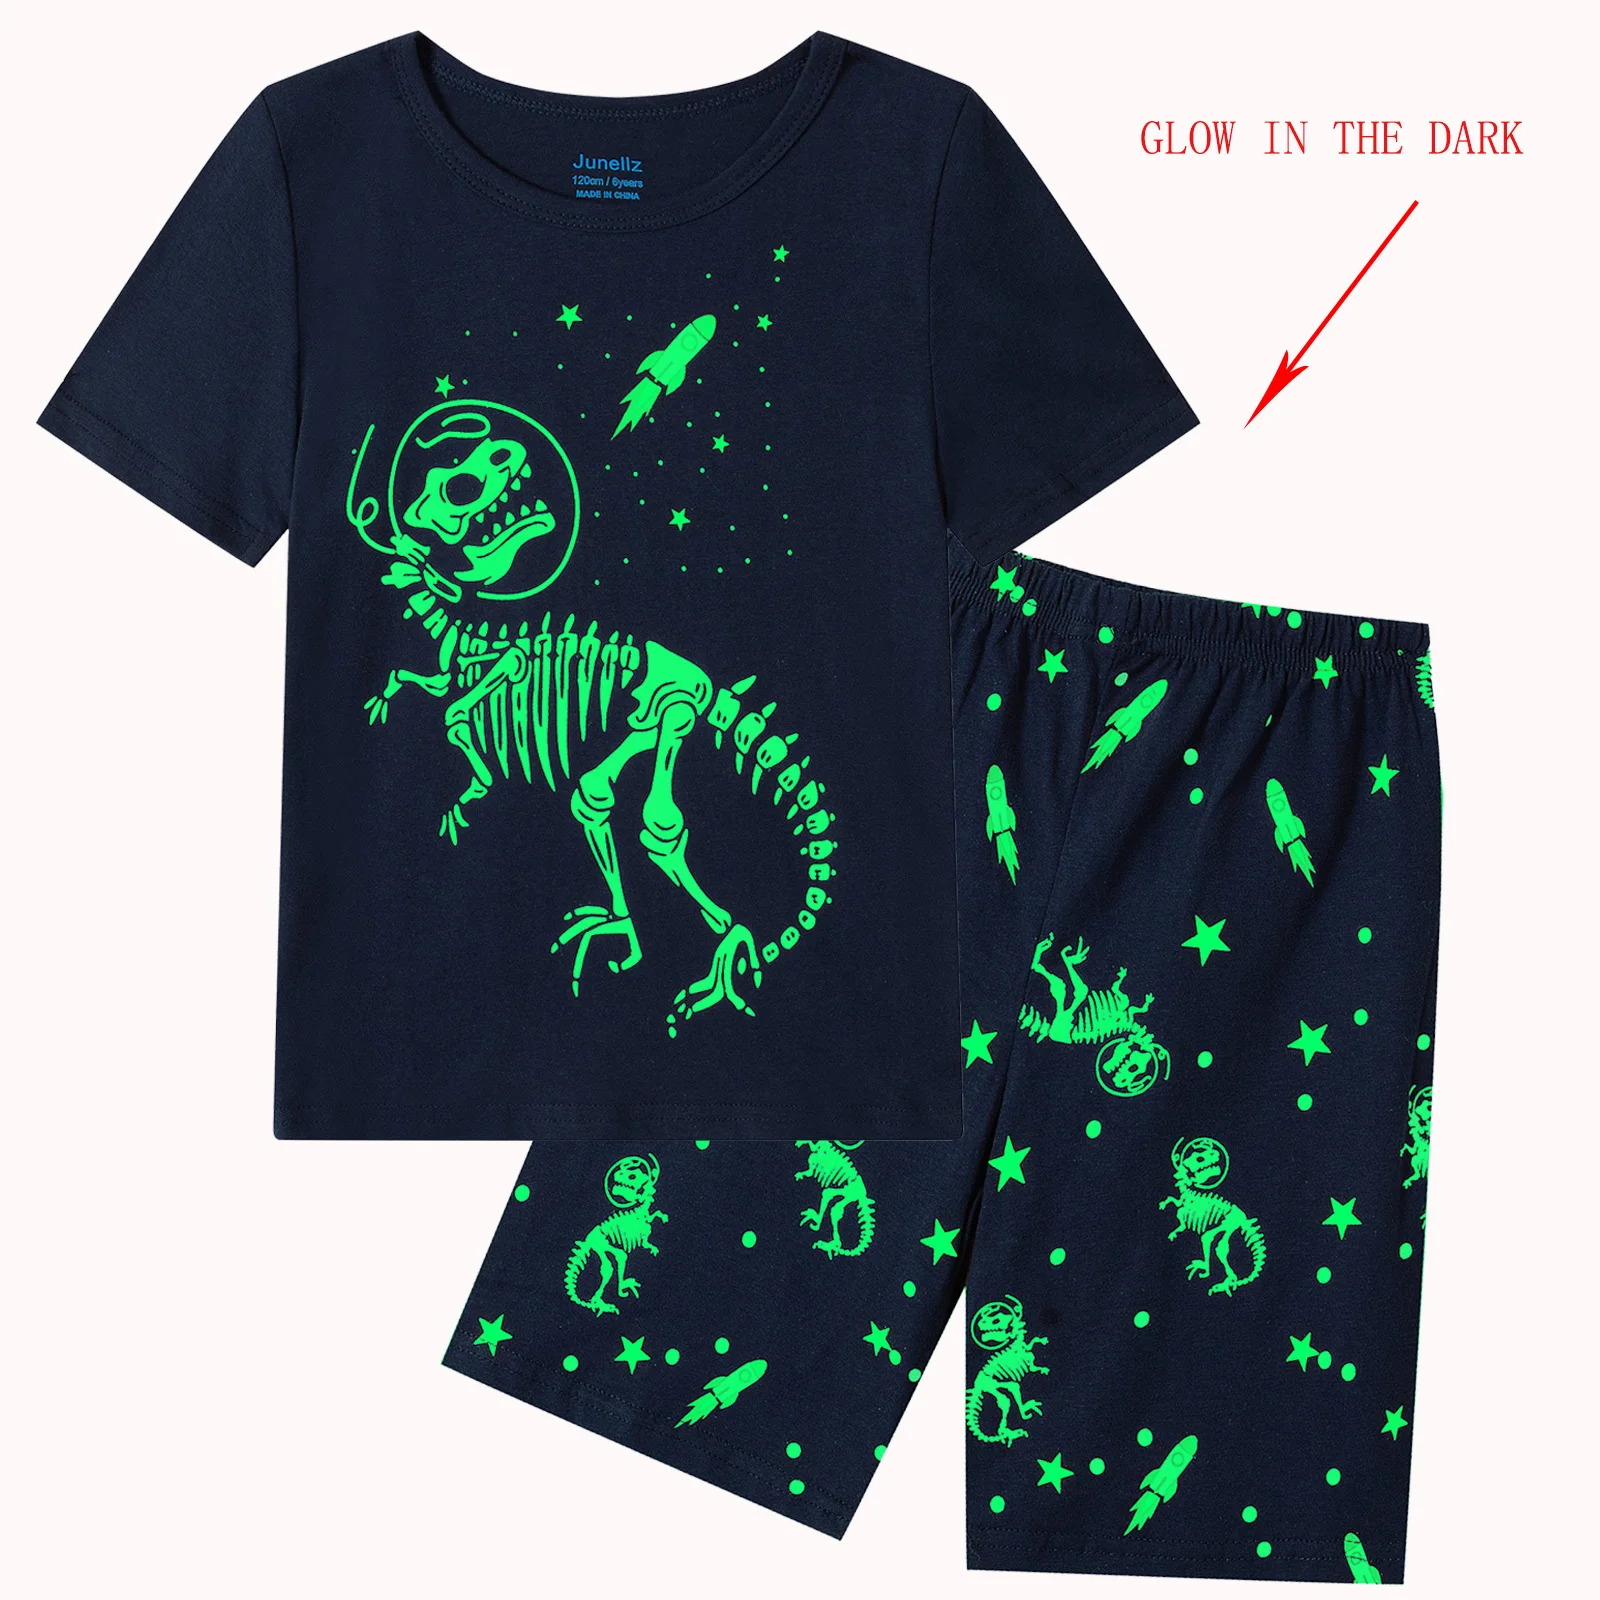 pajama sets boy Junellz Boys Summer Pajamas Sets Glow in The Dark Dinosaur Gifts 100% Cotton Dinosaur Costume Kids Outfit Clothes Toddler Pjs nightgowns and robes	